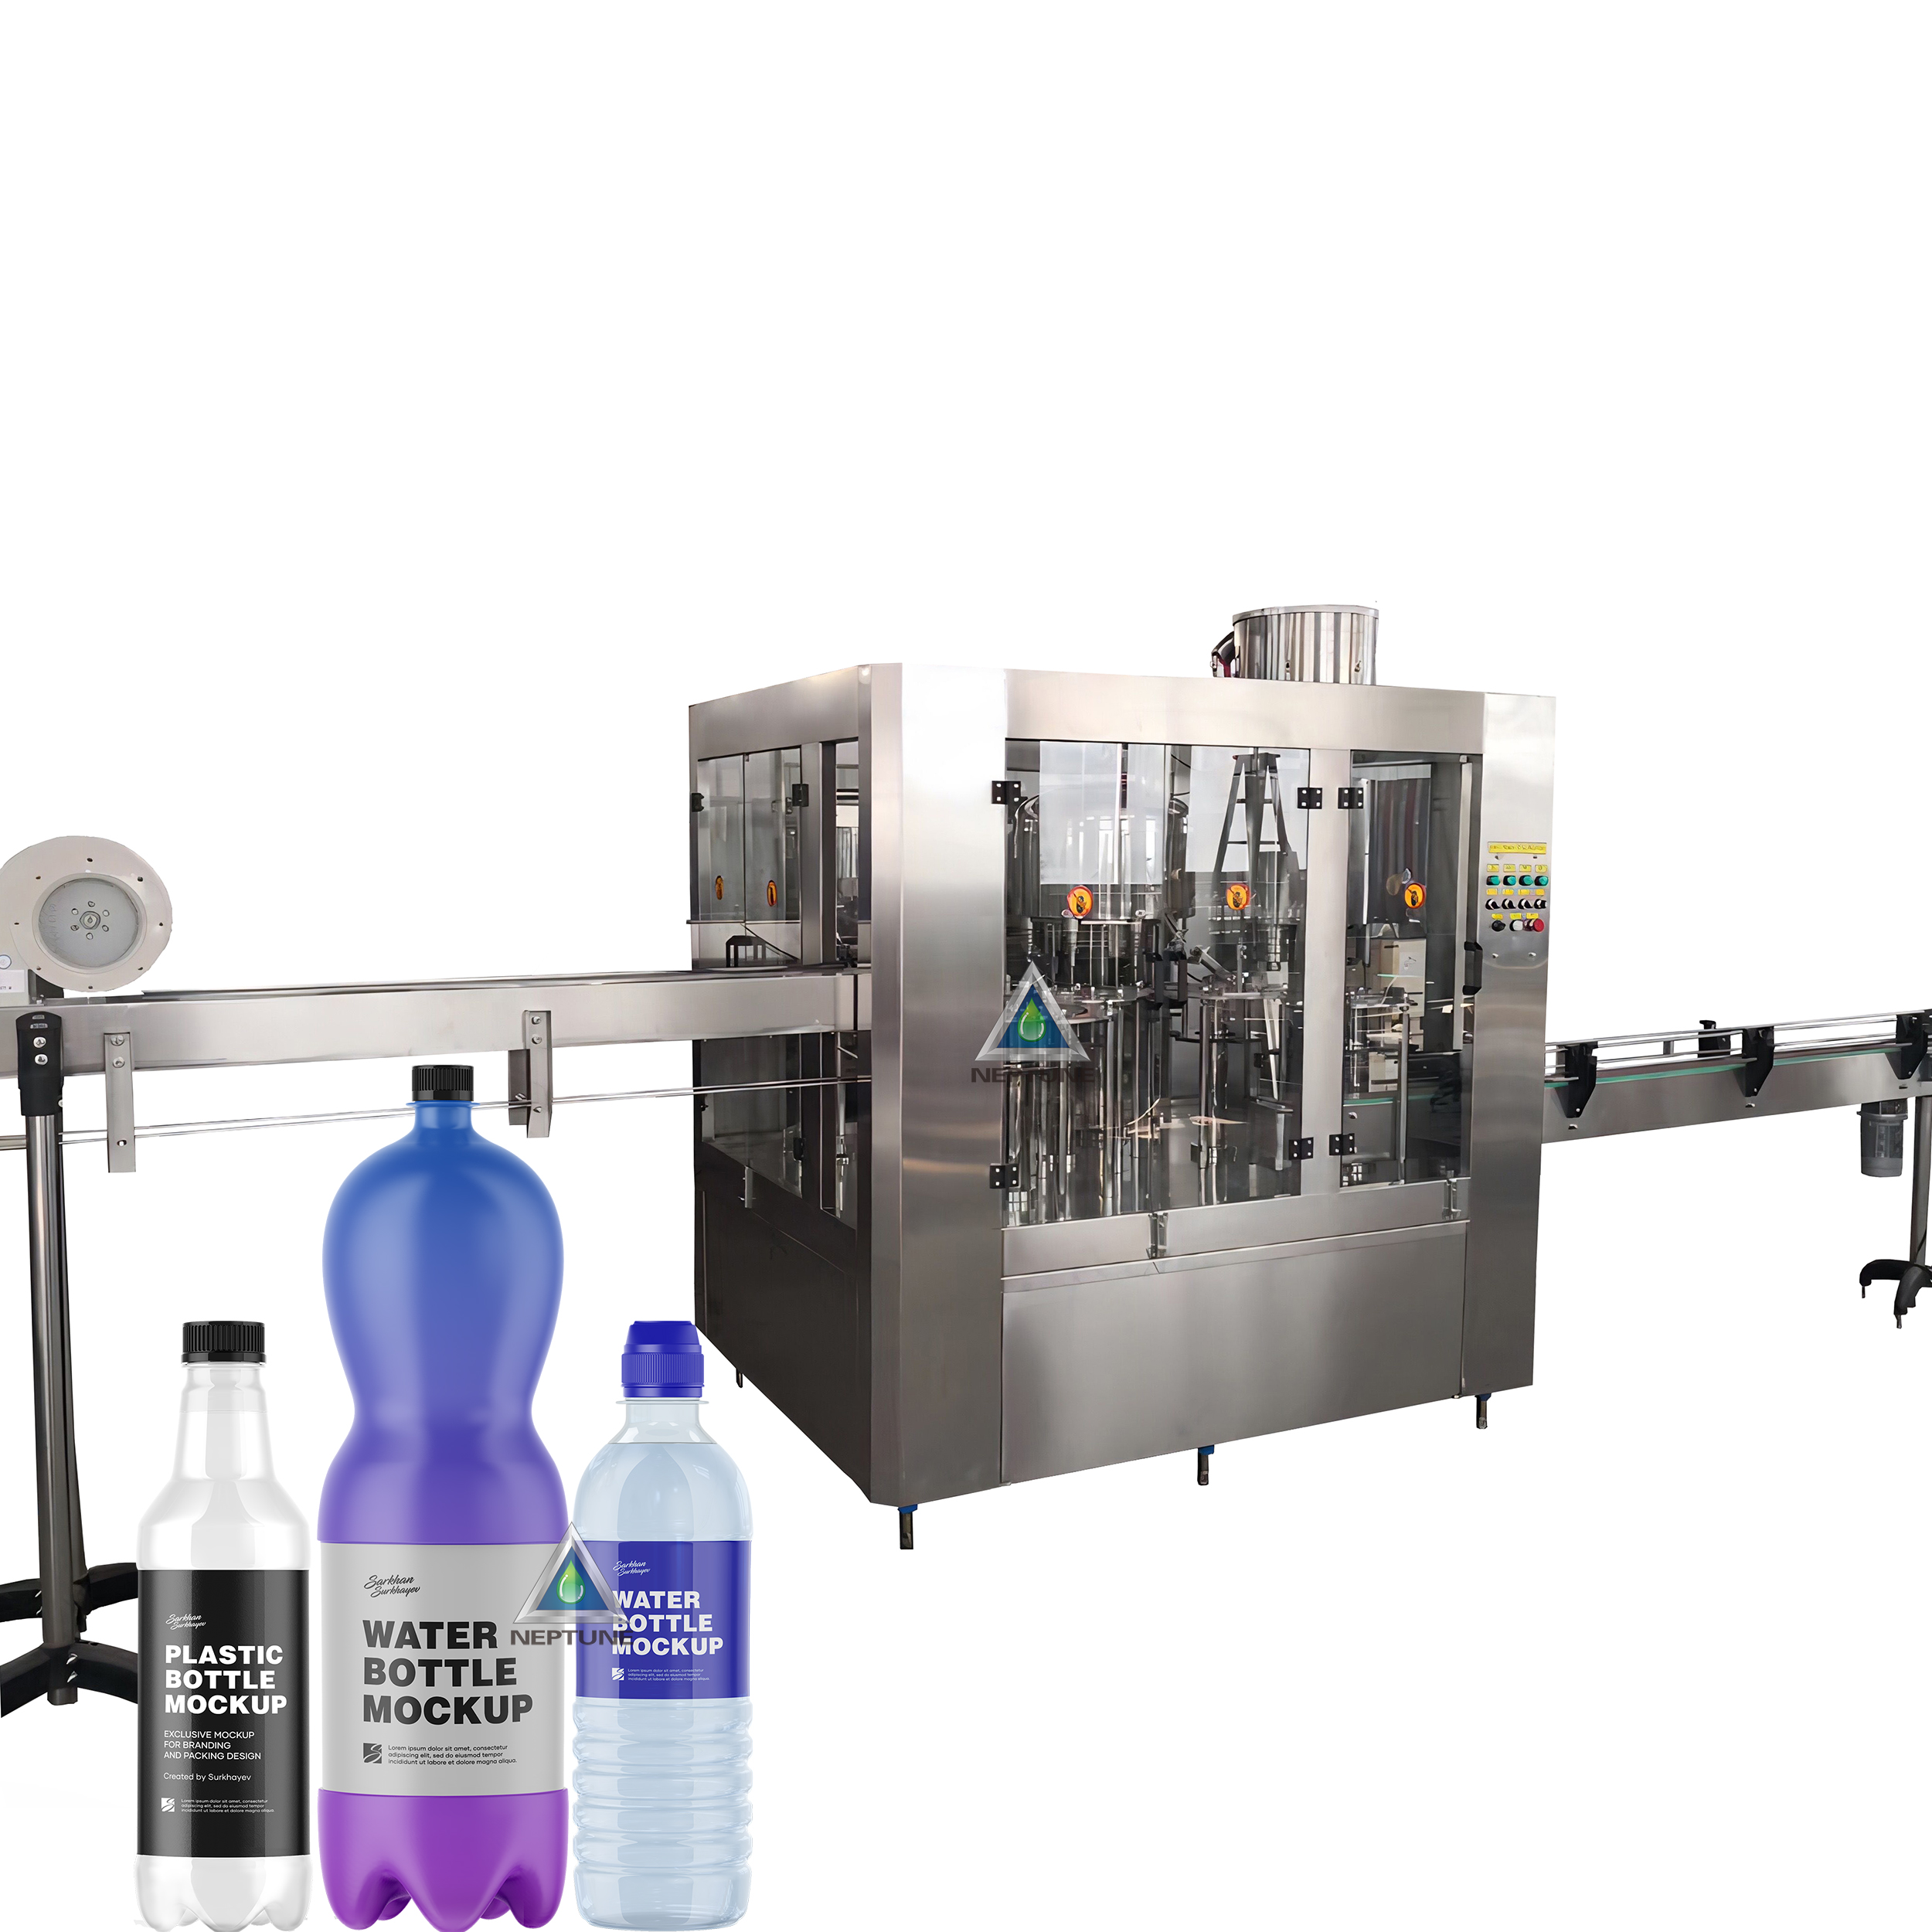 883 type water bottling machine is the cheapest monoblock filling machine for 200ml to 2000ml bottled water in the world